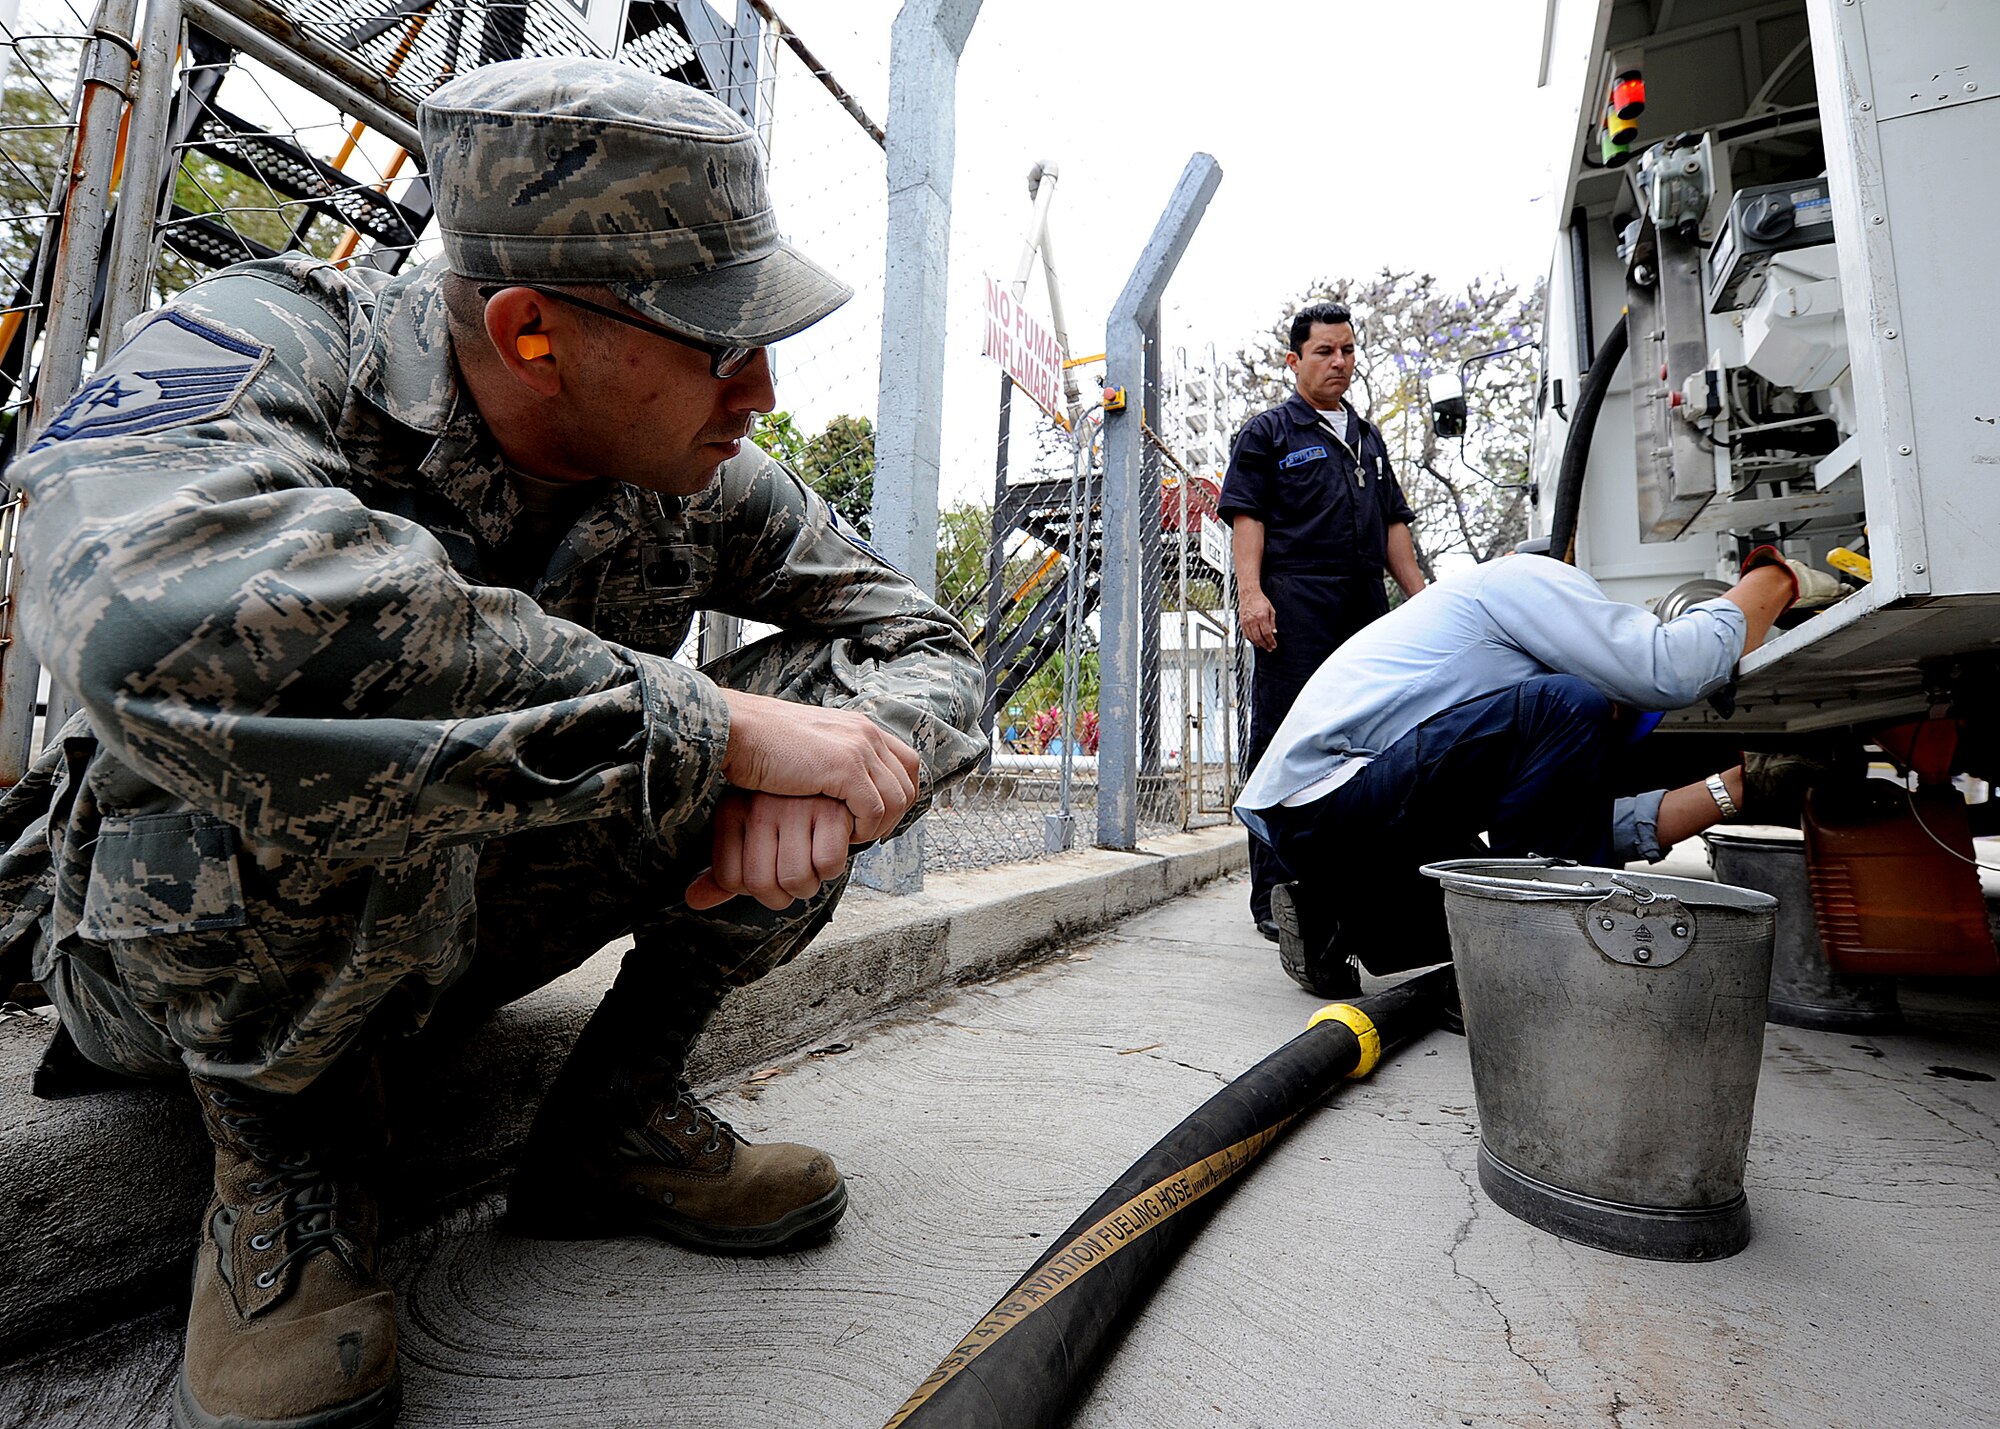 Master Sgt. Michael Raffa, 571st Mobility Support Advisory Squadron fuels air advisor, looks on as a Honduran contractor prepares the container for a fuel sample, in Tegucigalpa, Honduras, Feb. 13.  Approximately 20 members of Air Mobility Command's 571st Mobility Support Advisory Squadron, alongside their Honduran Air Force counterparts, are participating in a building partner capacity mission designed to enhance military-to-military relations between the two nations.  (U.S. Air Force photo by Tech. Sgt. Lesley Waters)